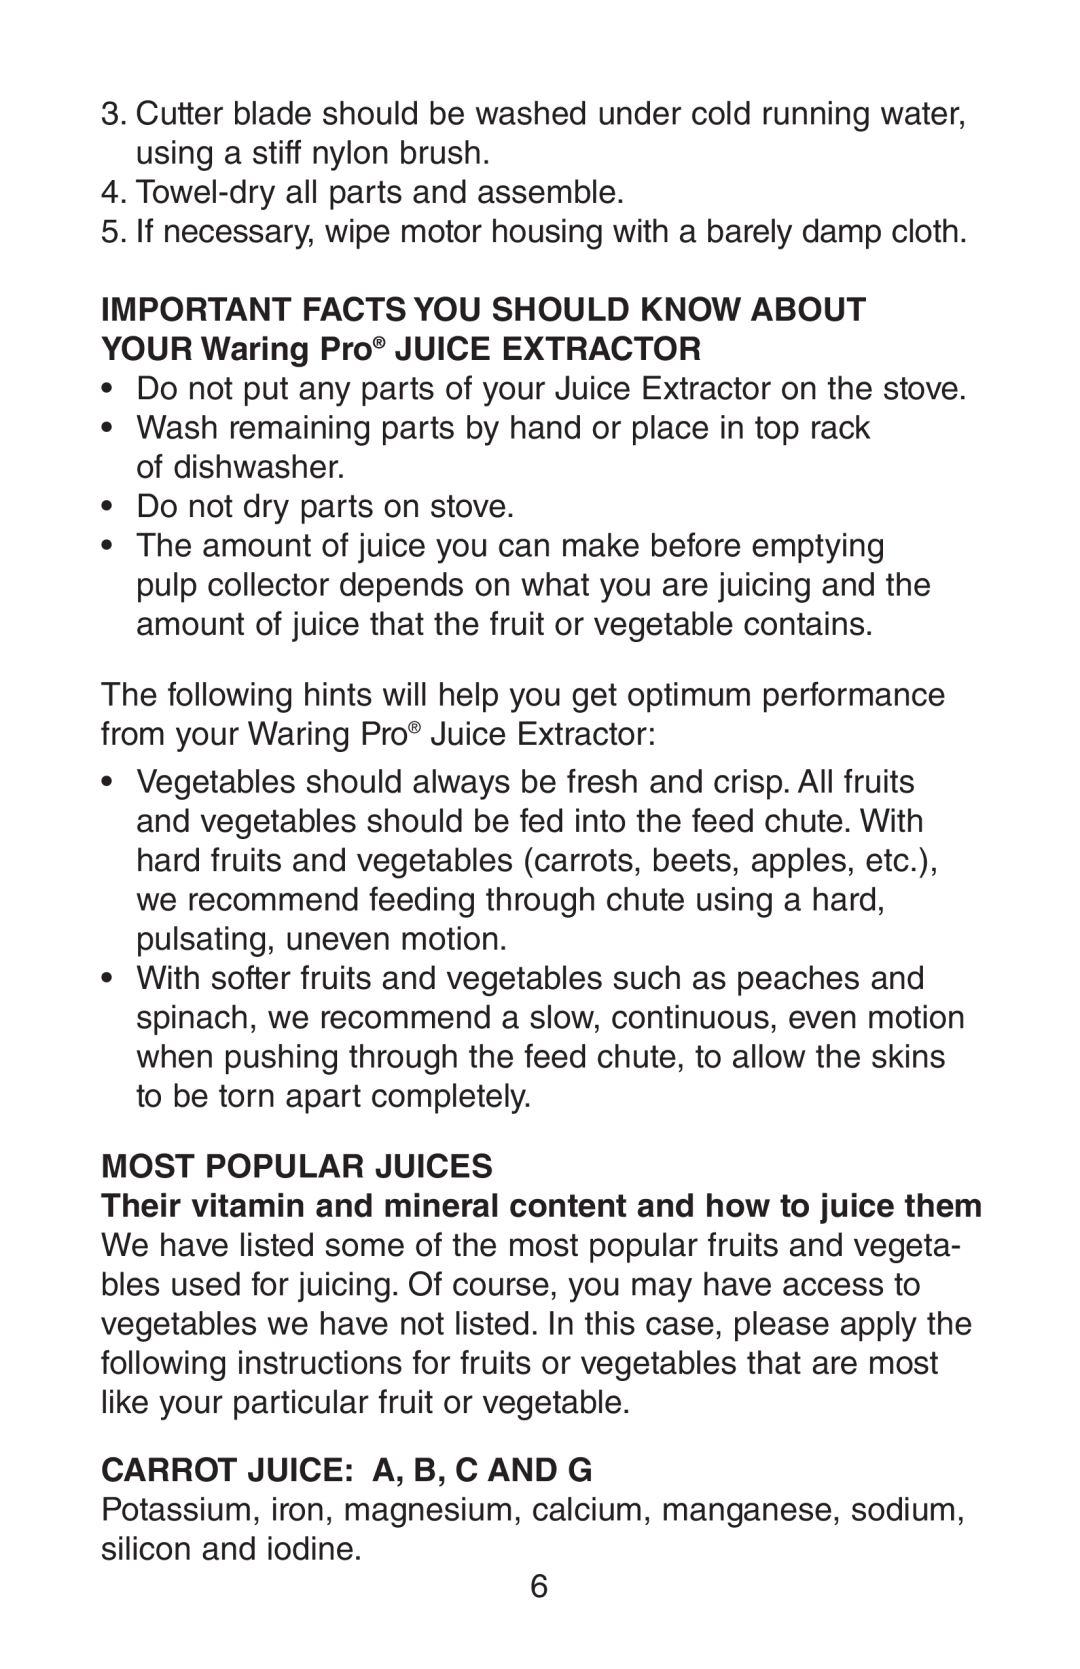 Waring JEX328 manual Most Popular Juices, Carrot Juice A, B, C And G 